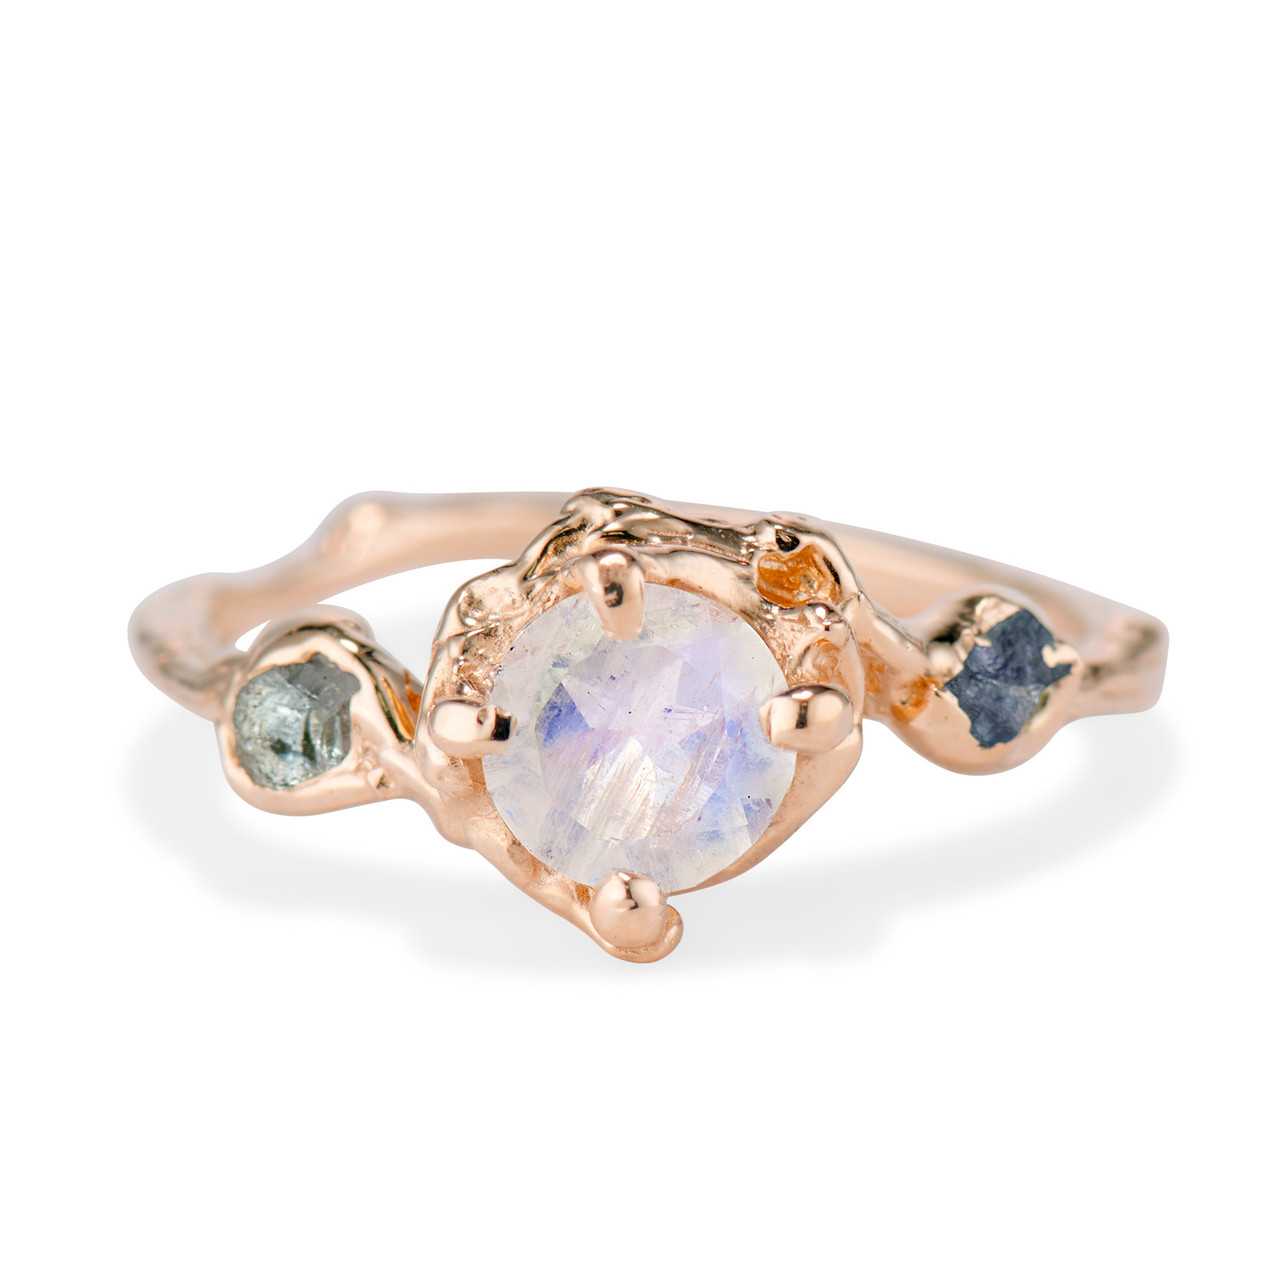 The Naples Moonstone Trio Ring. A polished round moonstone sits beside two rough Montana sapphires and is set on a nature inspired band. 